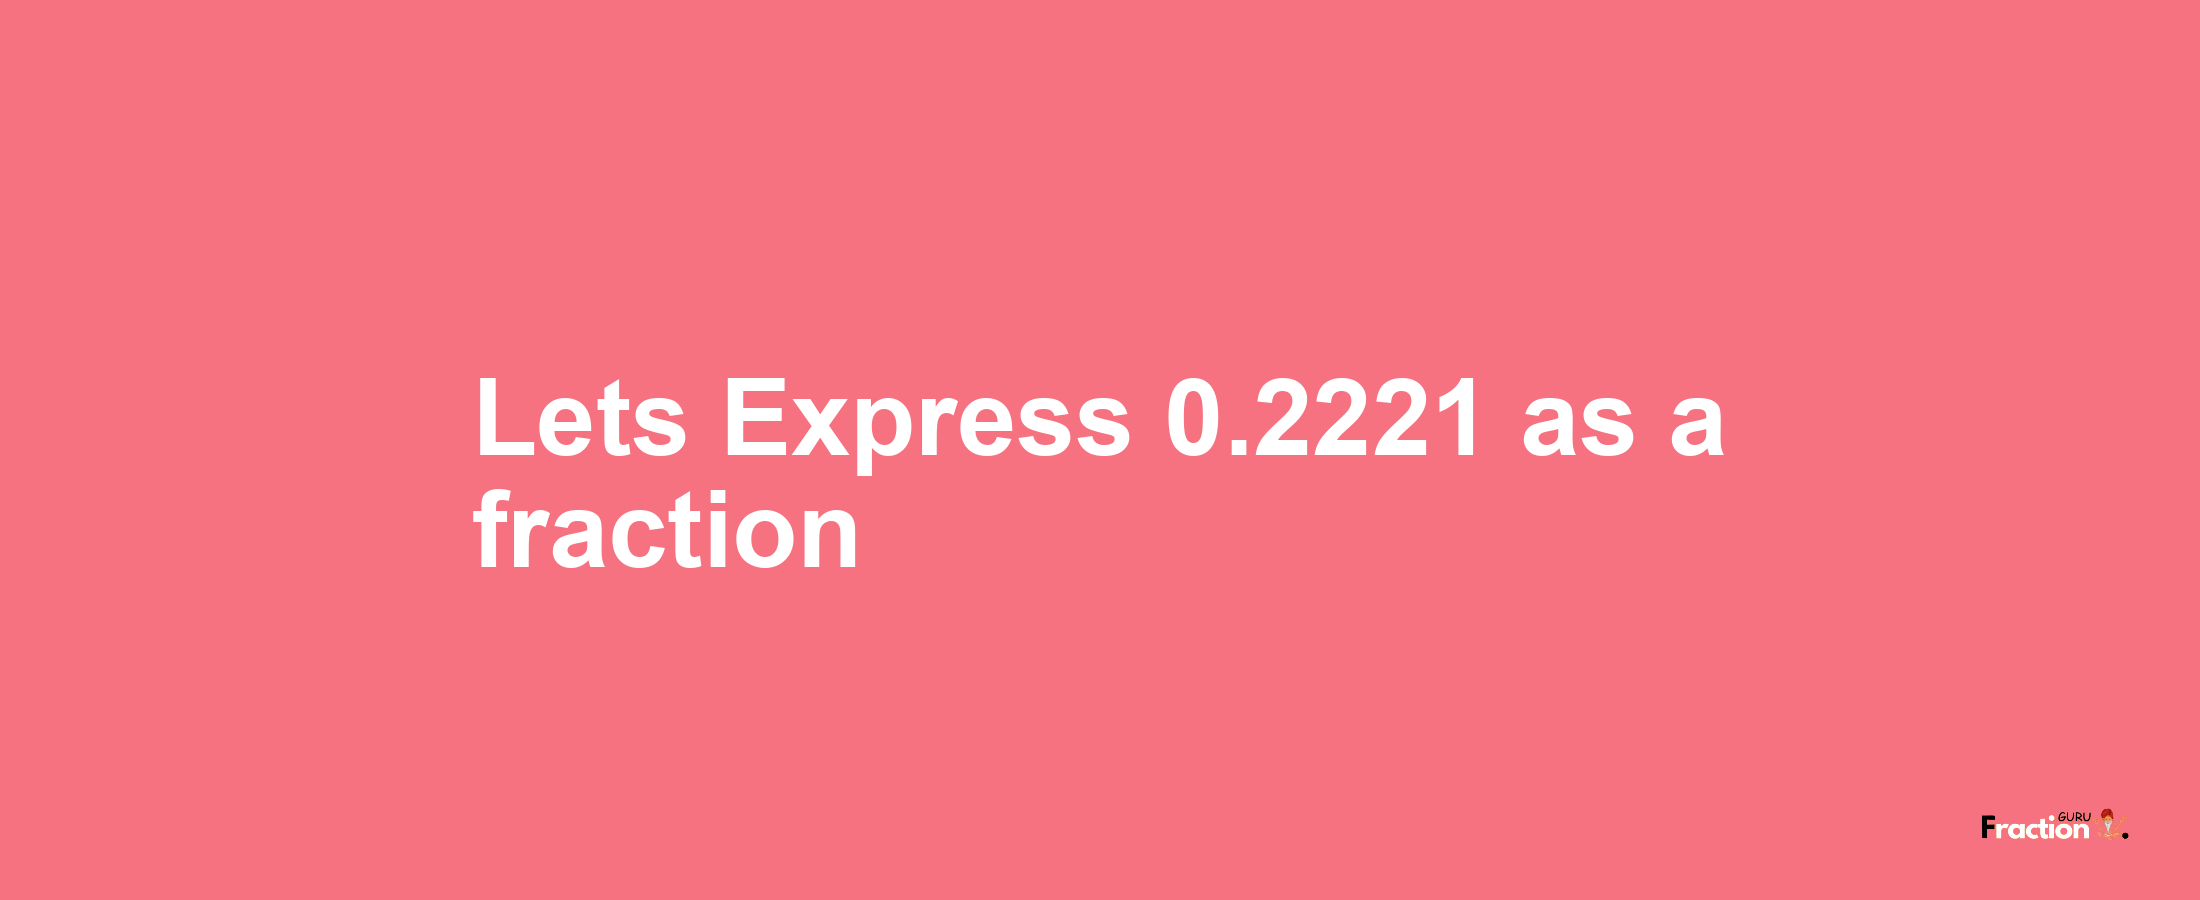 Lets Express 0.2221 as afraction